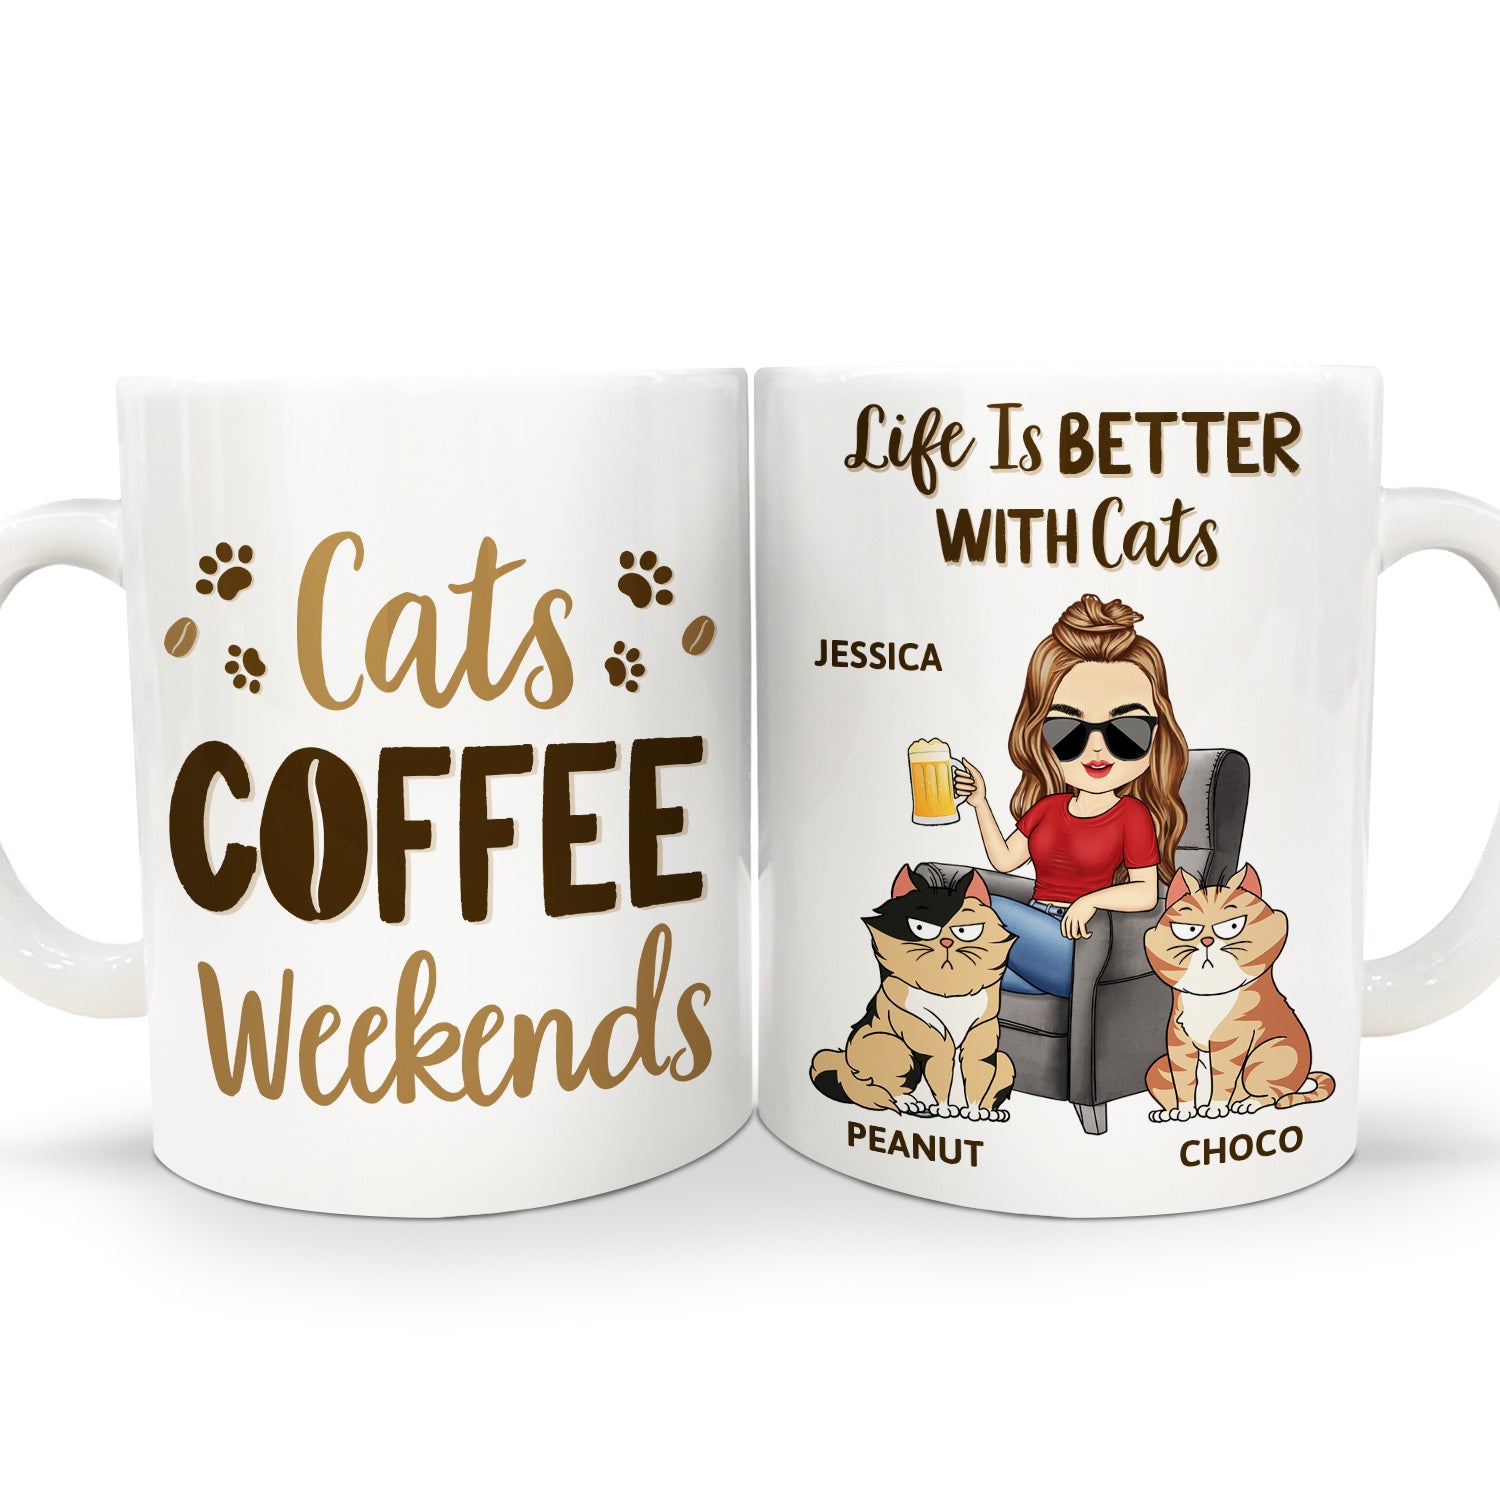 Cats Coffee Weekends - Gift For Cat Lovers, Cat Moms - Personalized White Edge-to-Edge Mug